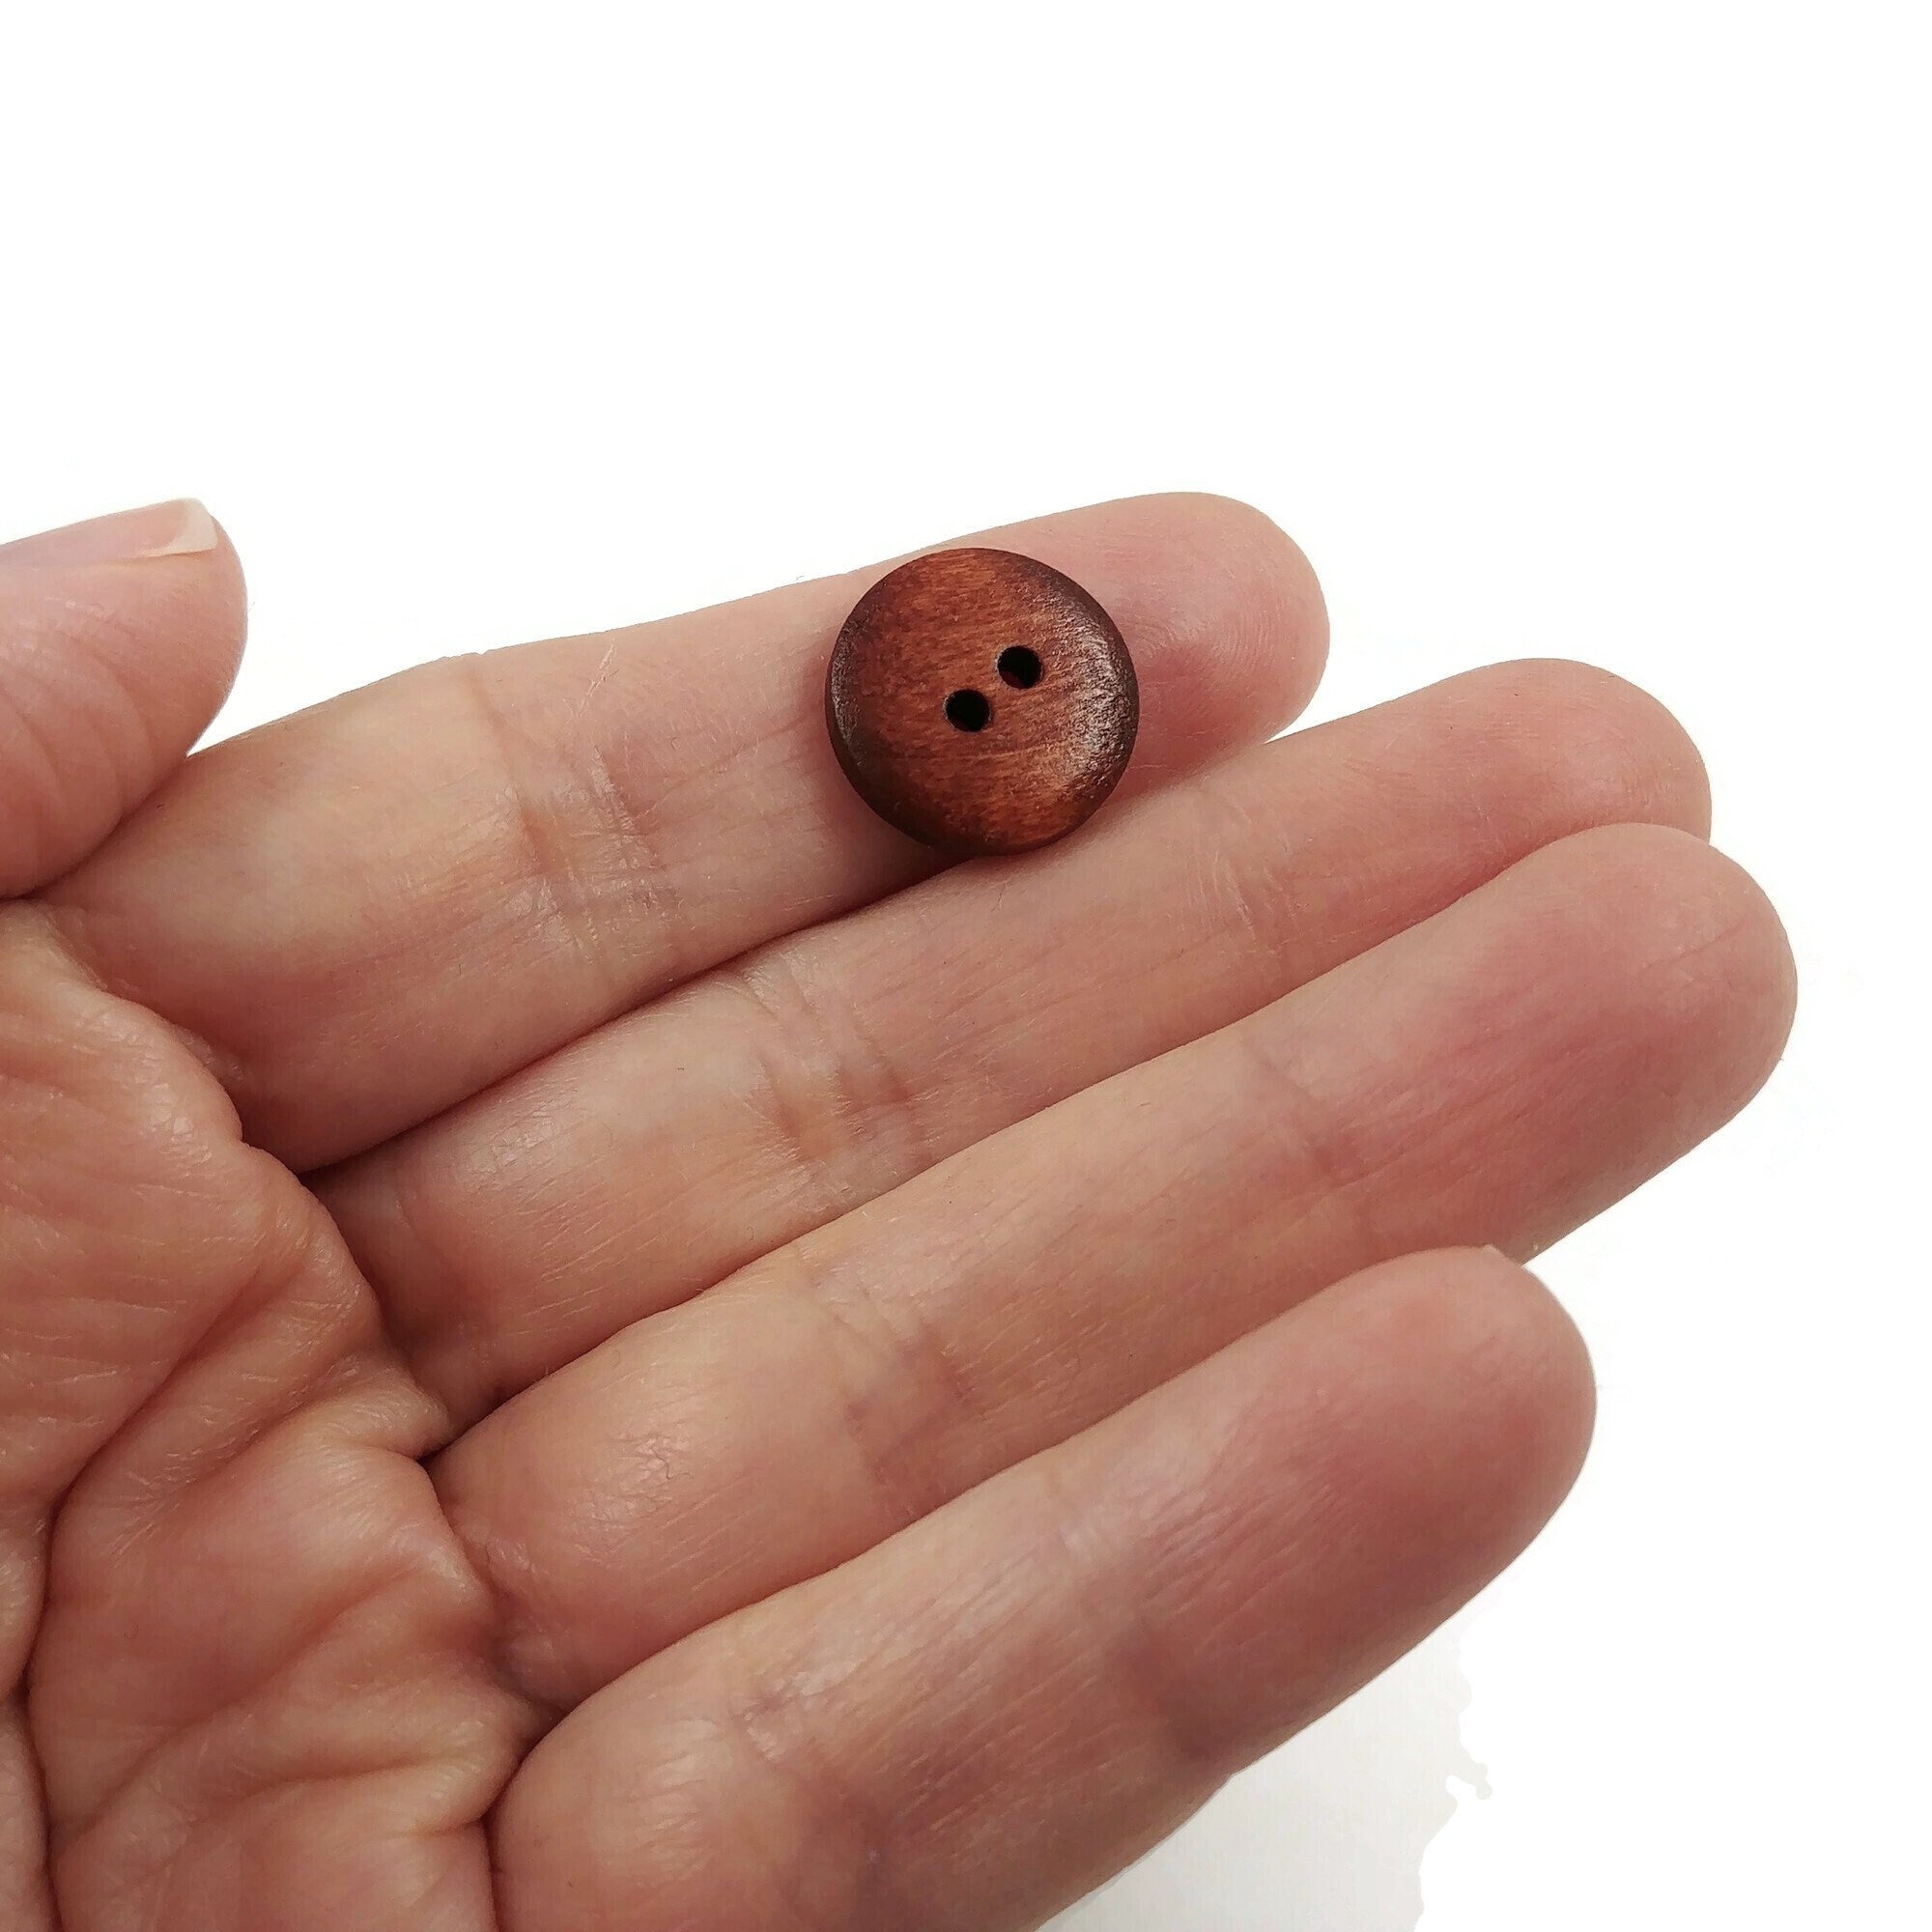 LARGE BROWN BUTTONS WOOD GRAIN 64mm - Nasias Buttons